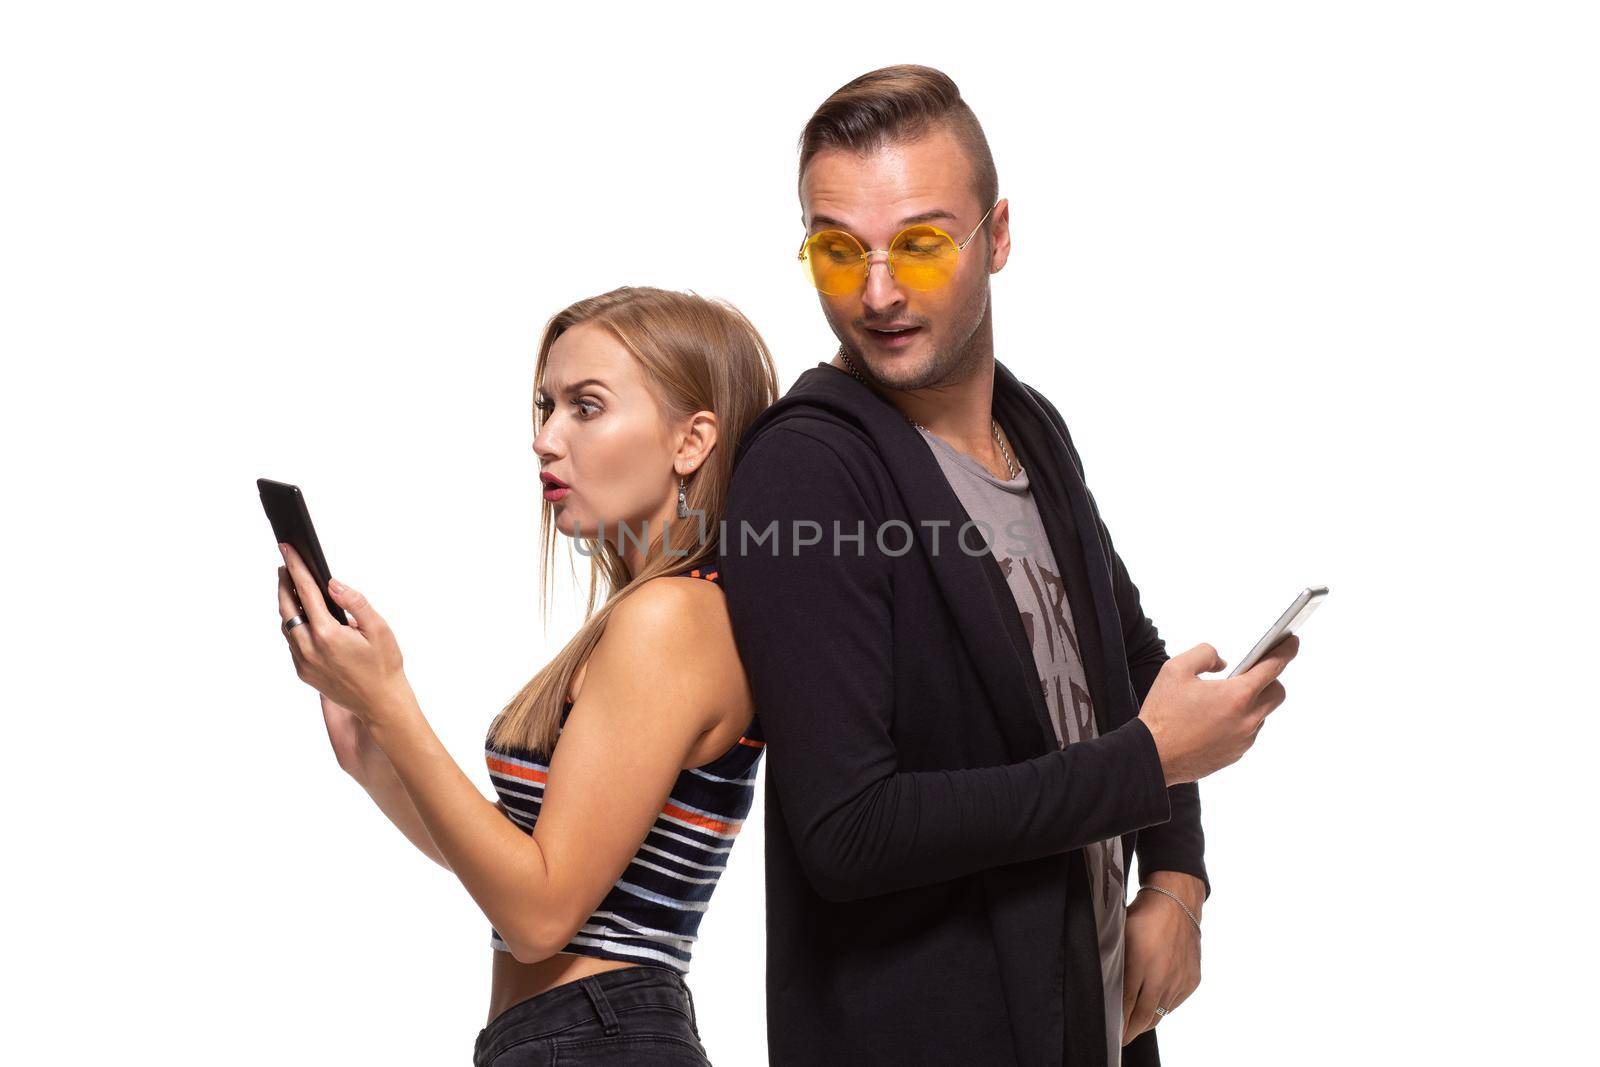 Man and woman stand with their backs to each other with telephones in their hands on white background. Studio shot